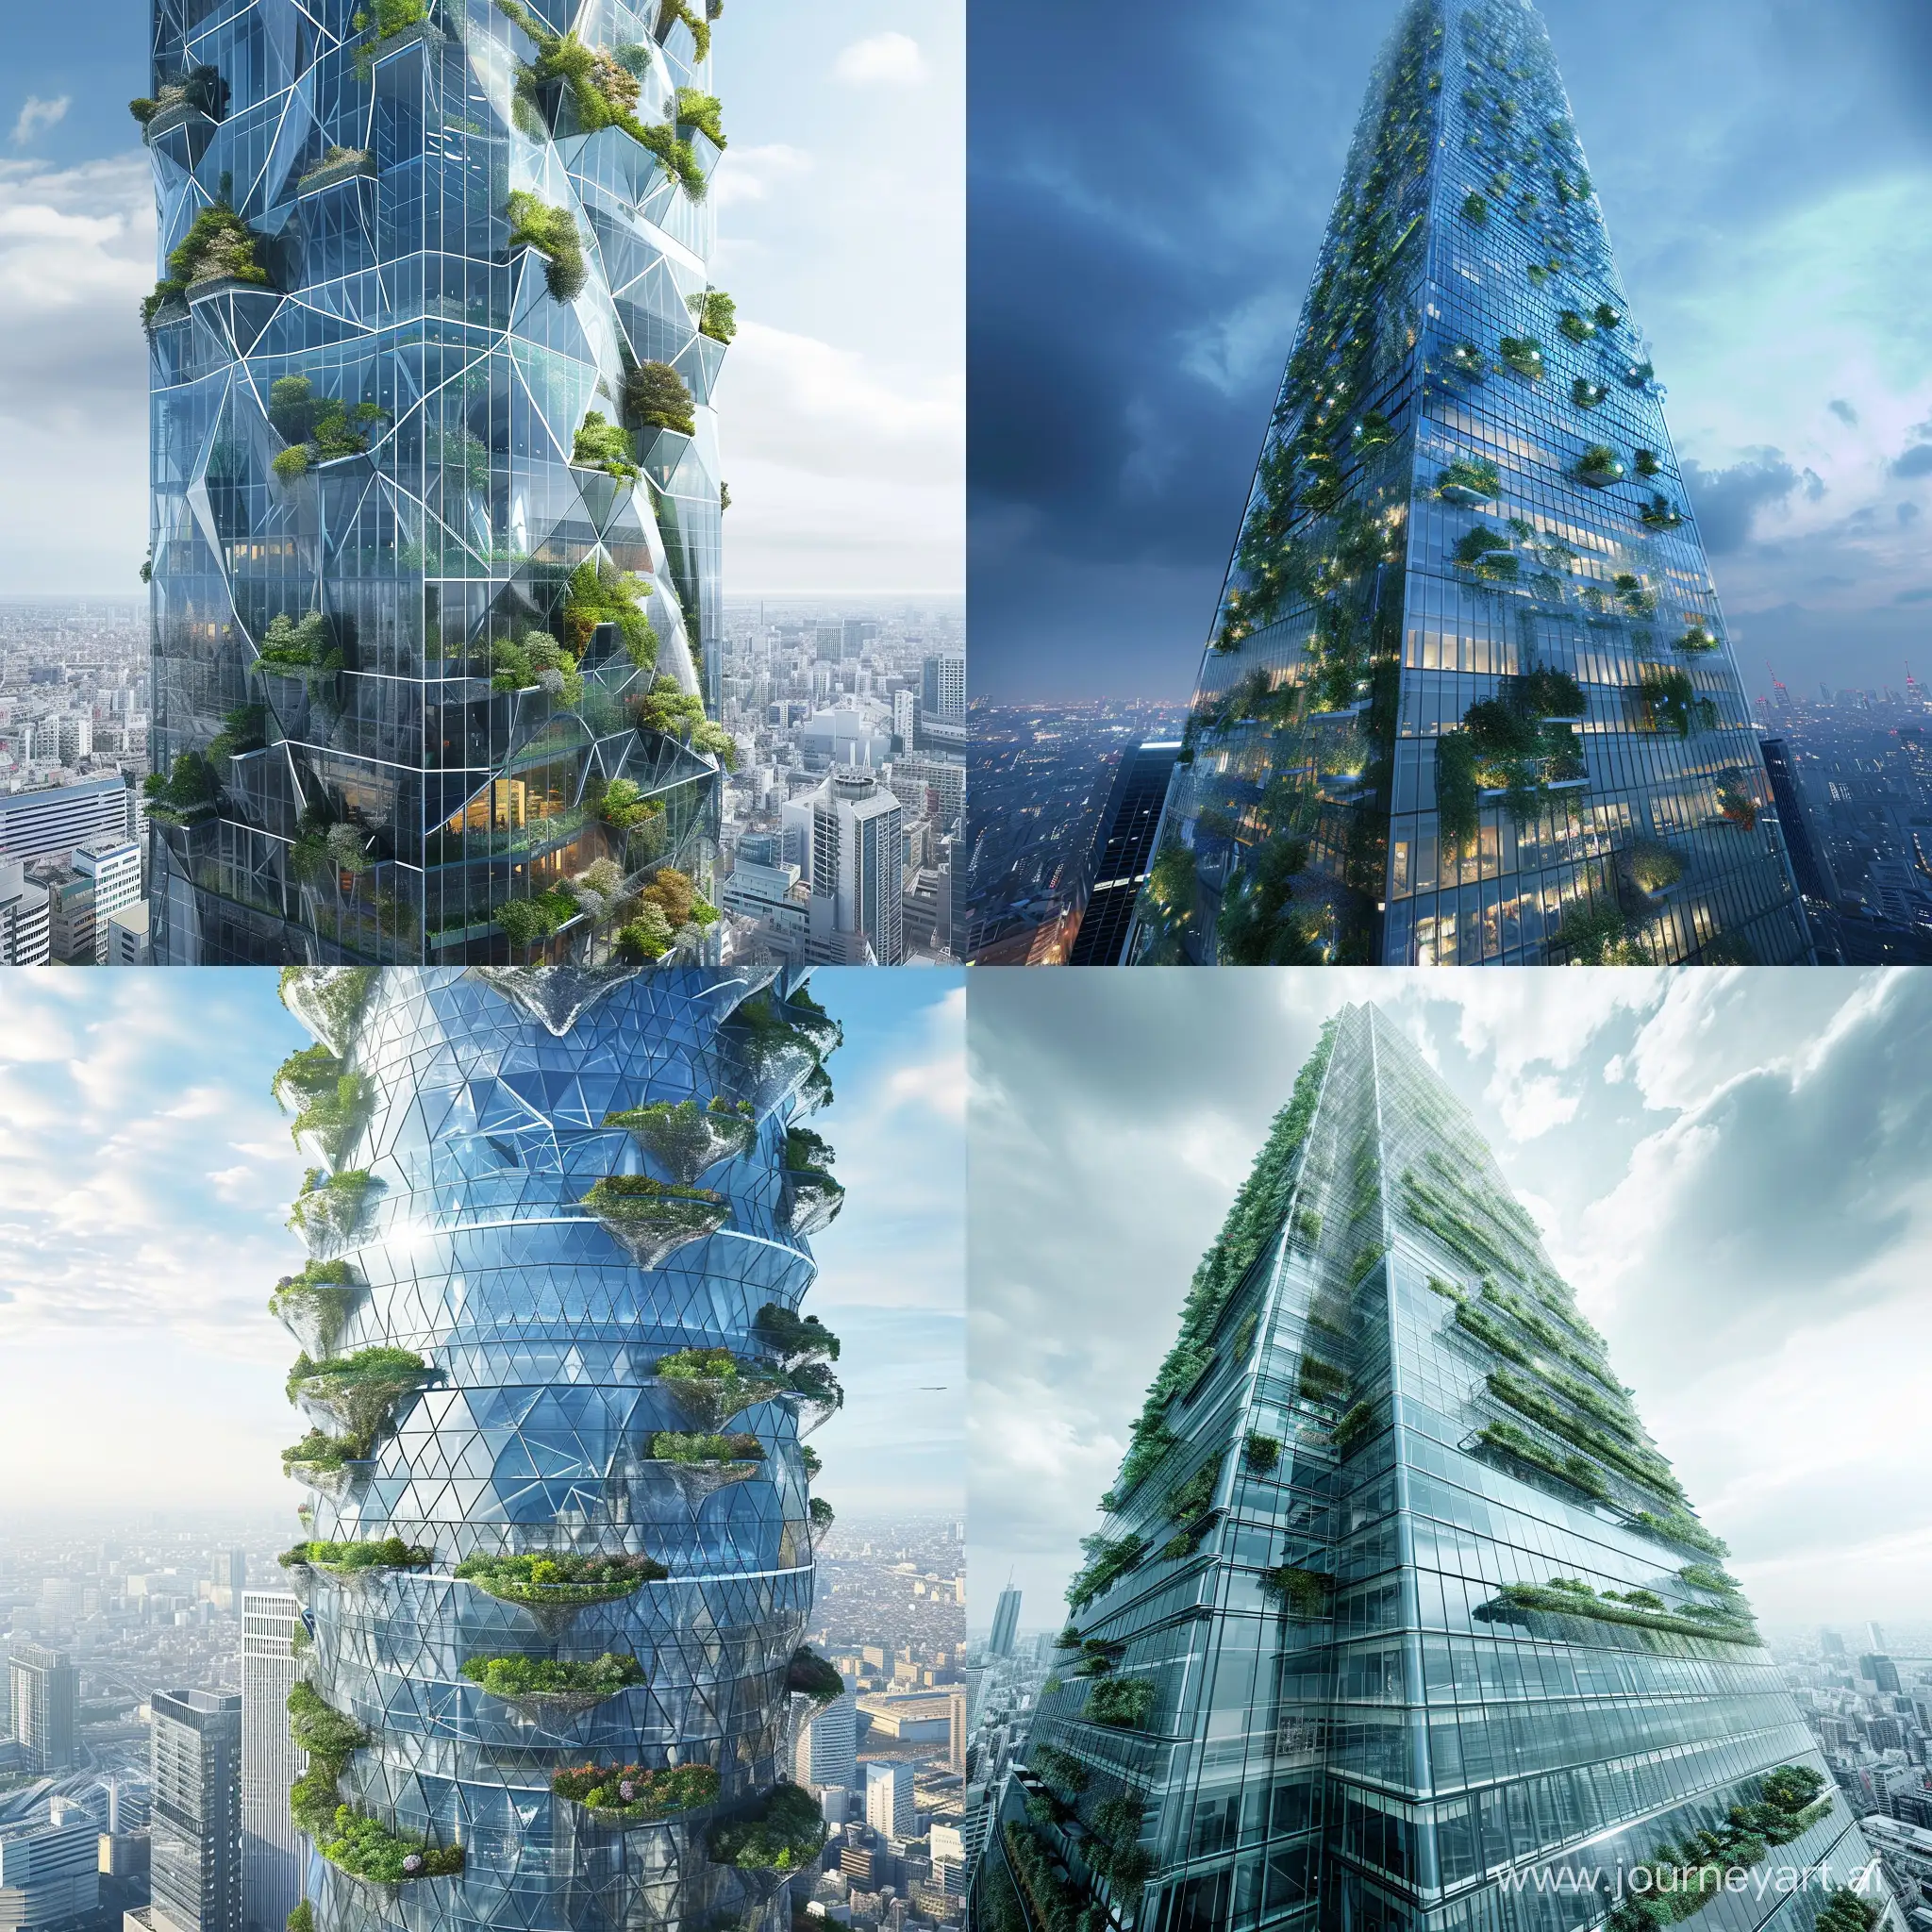 Innovative-Tokyo-Skyscraper-Futuristic-Glass-Structure-with-Parametric-Facade-and-Hanging-Gardens